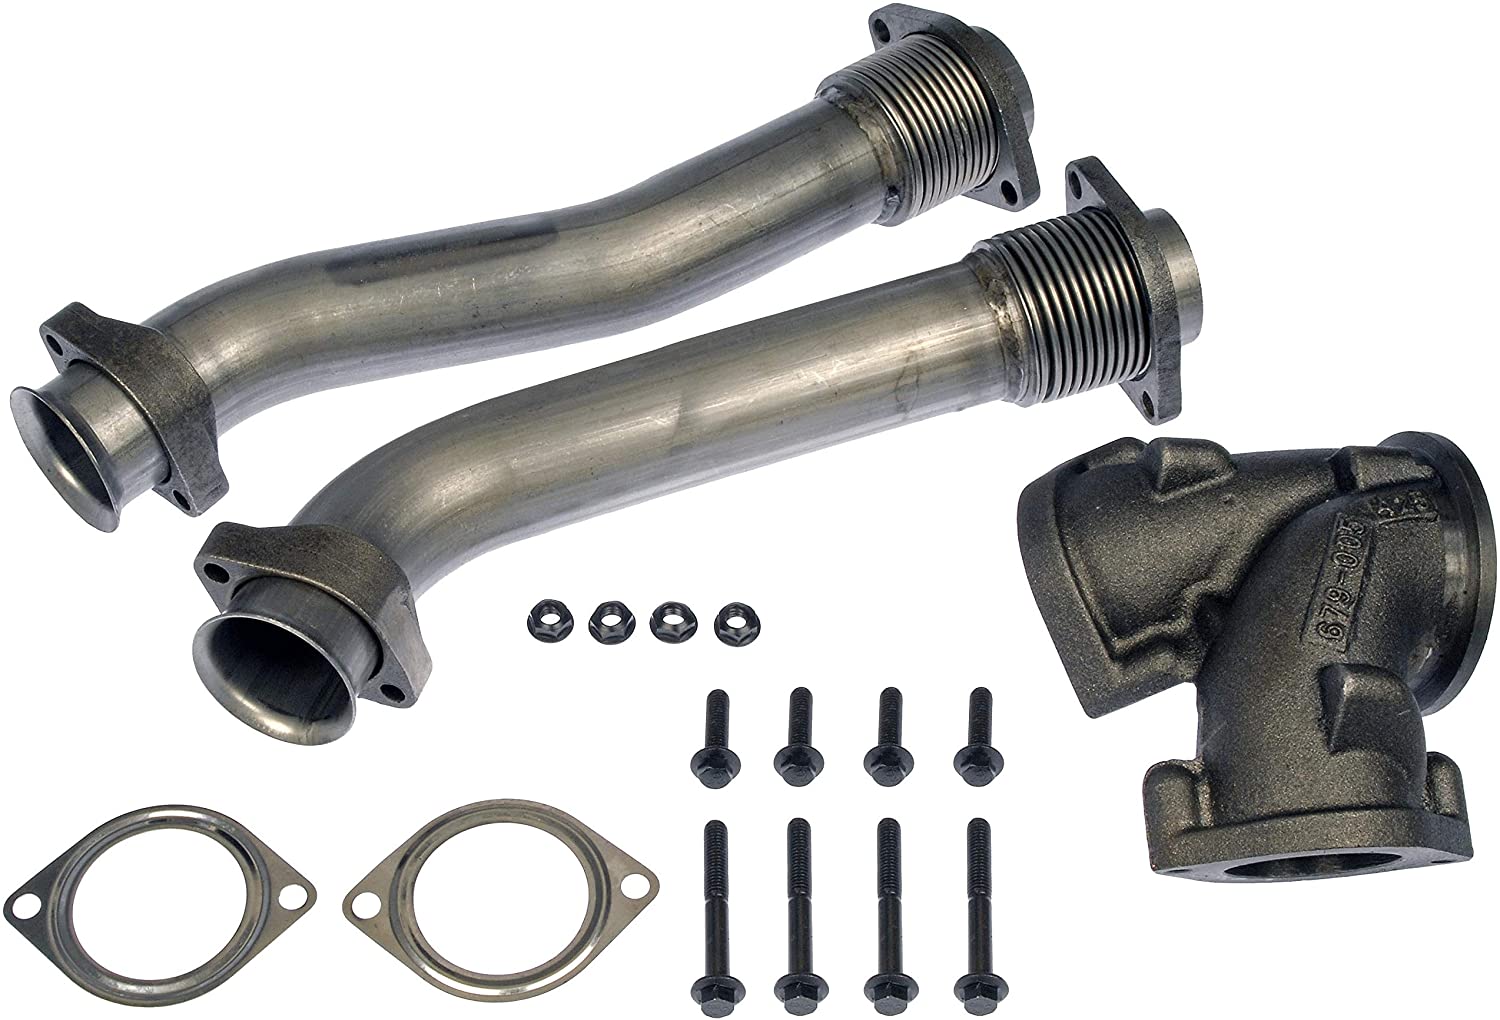 Dorman 679-005 Turbocharger Up Pipe Kit for Select Ford / IC Corporation / International Models